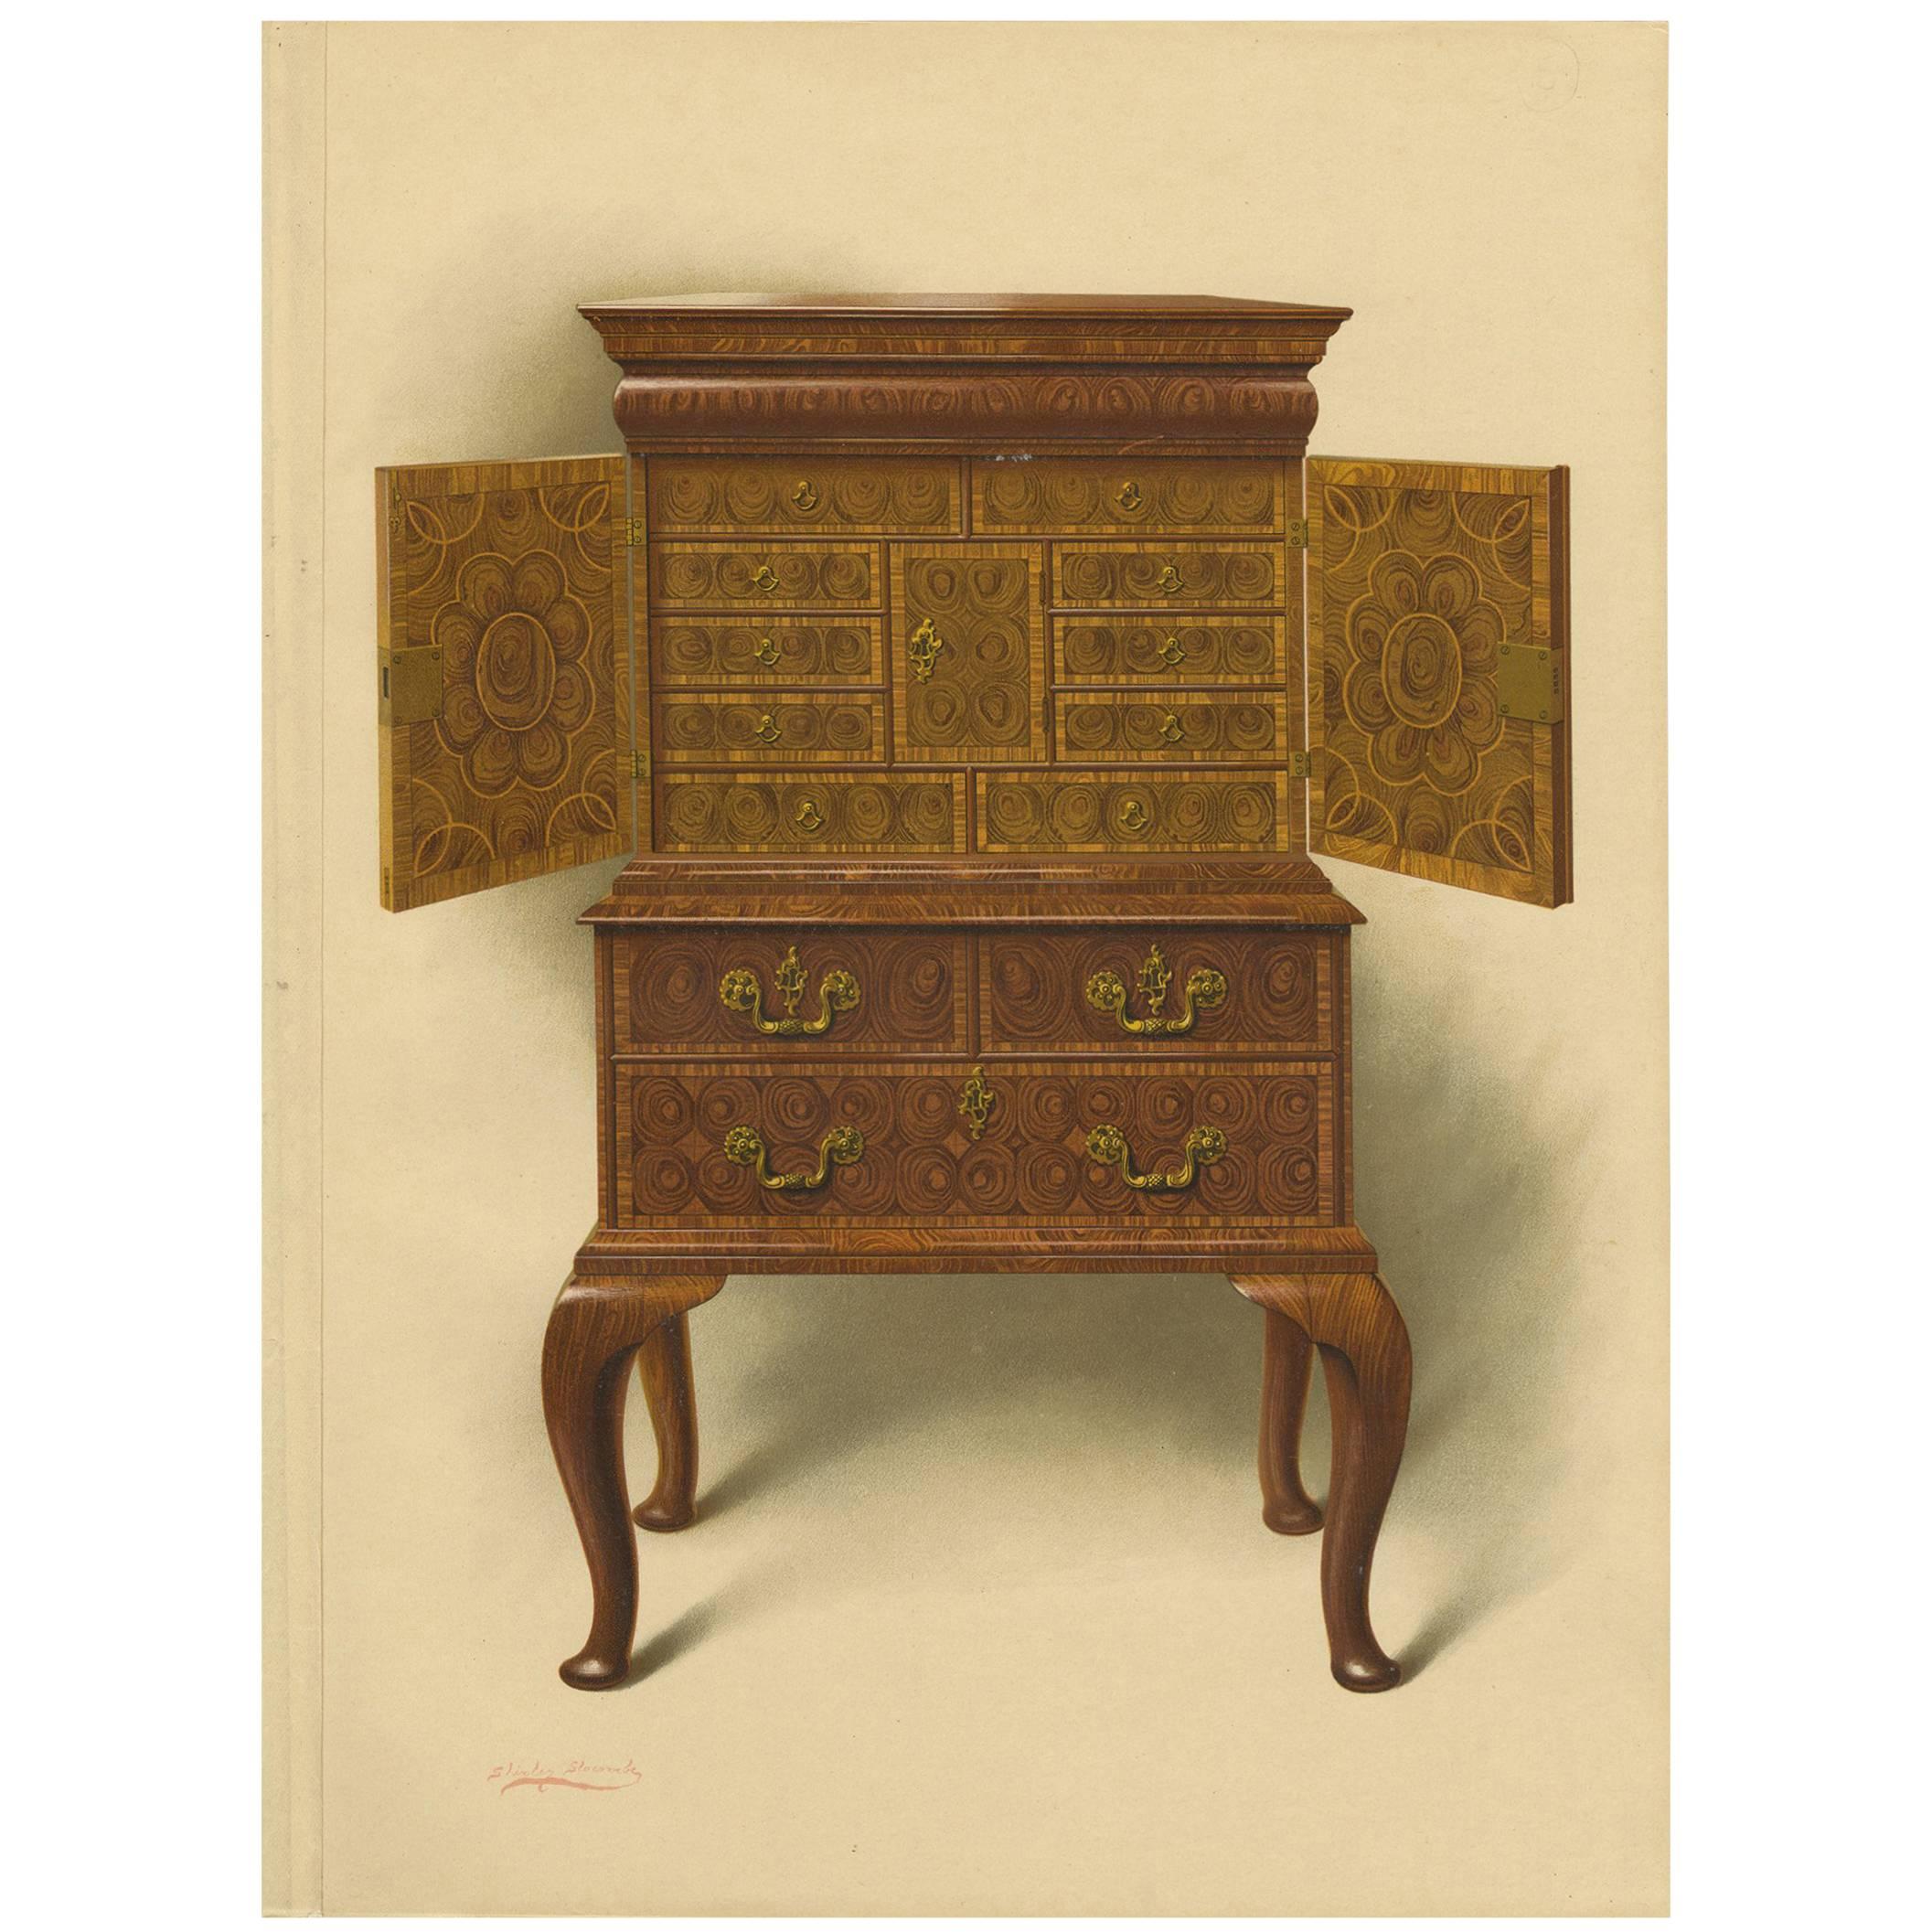 Antique Print of English Furniture ‘Walnut Cabinet E. Dent’ by P. Macquoid For Sale